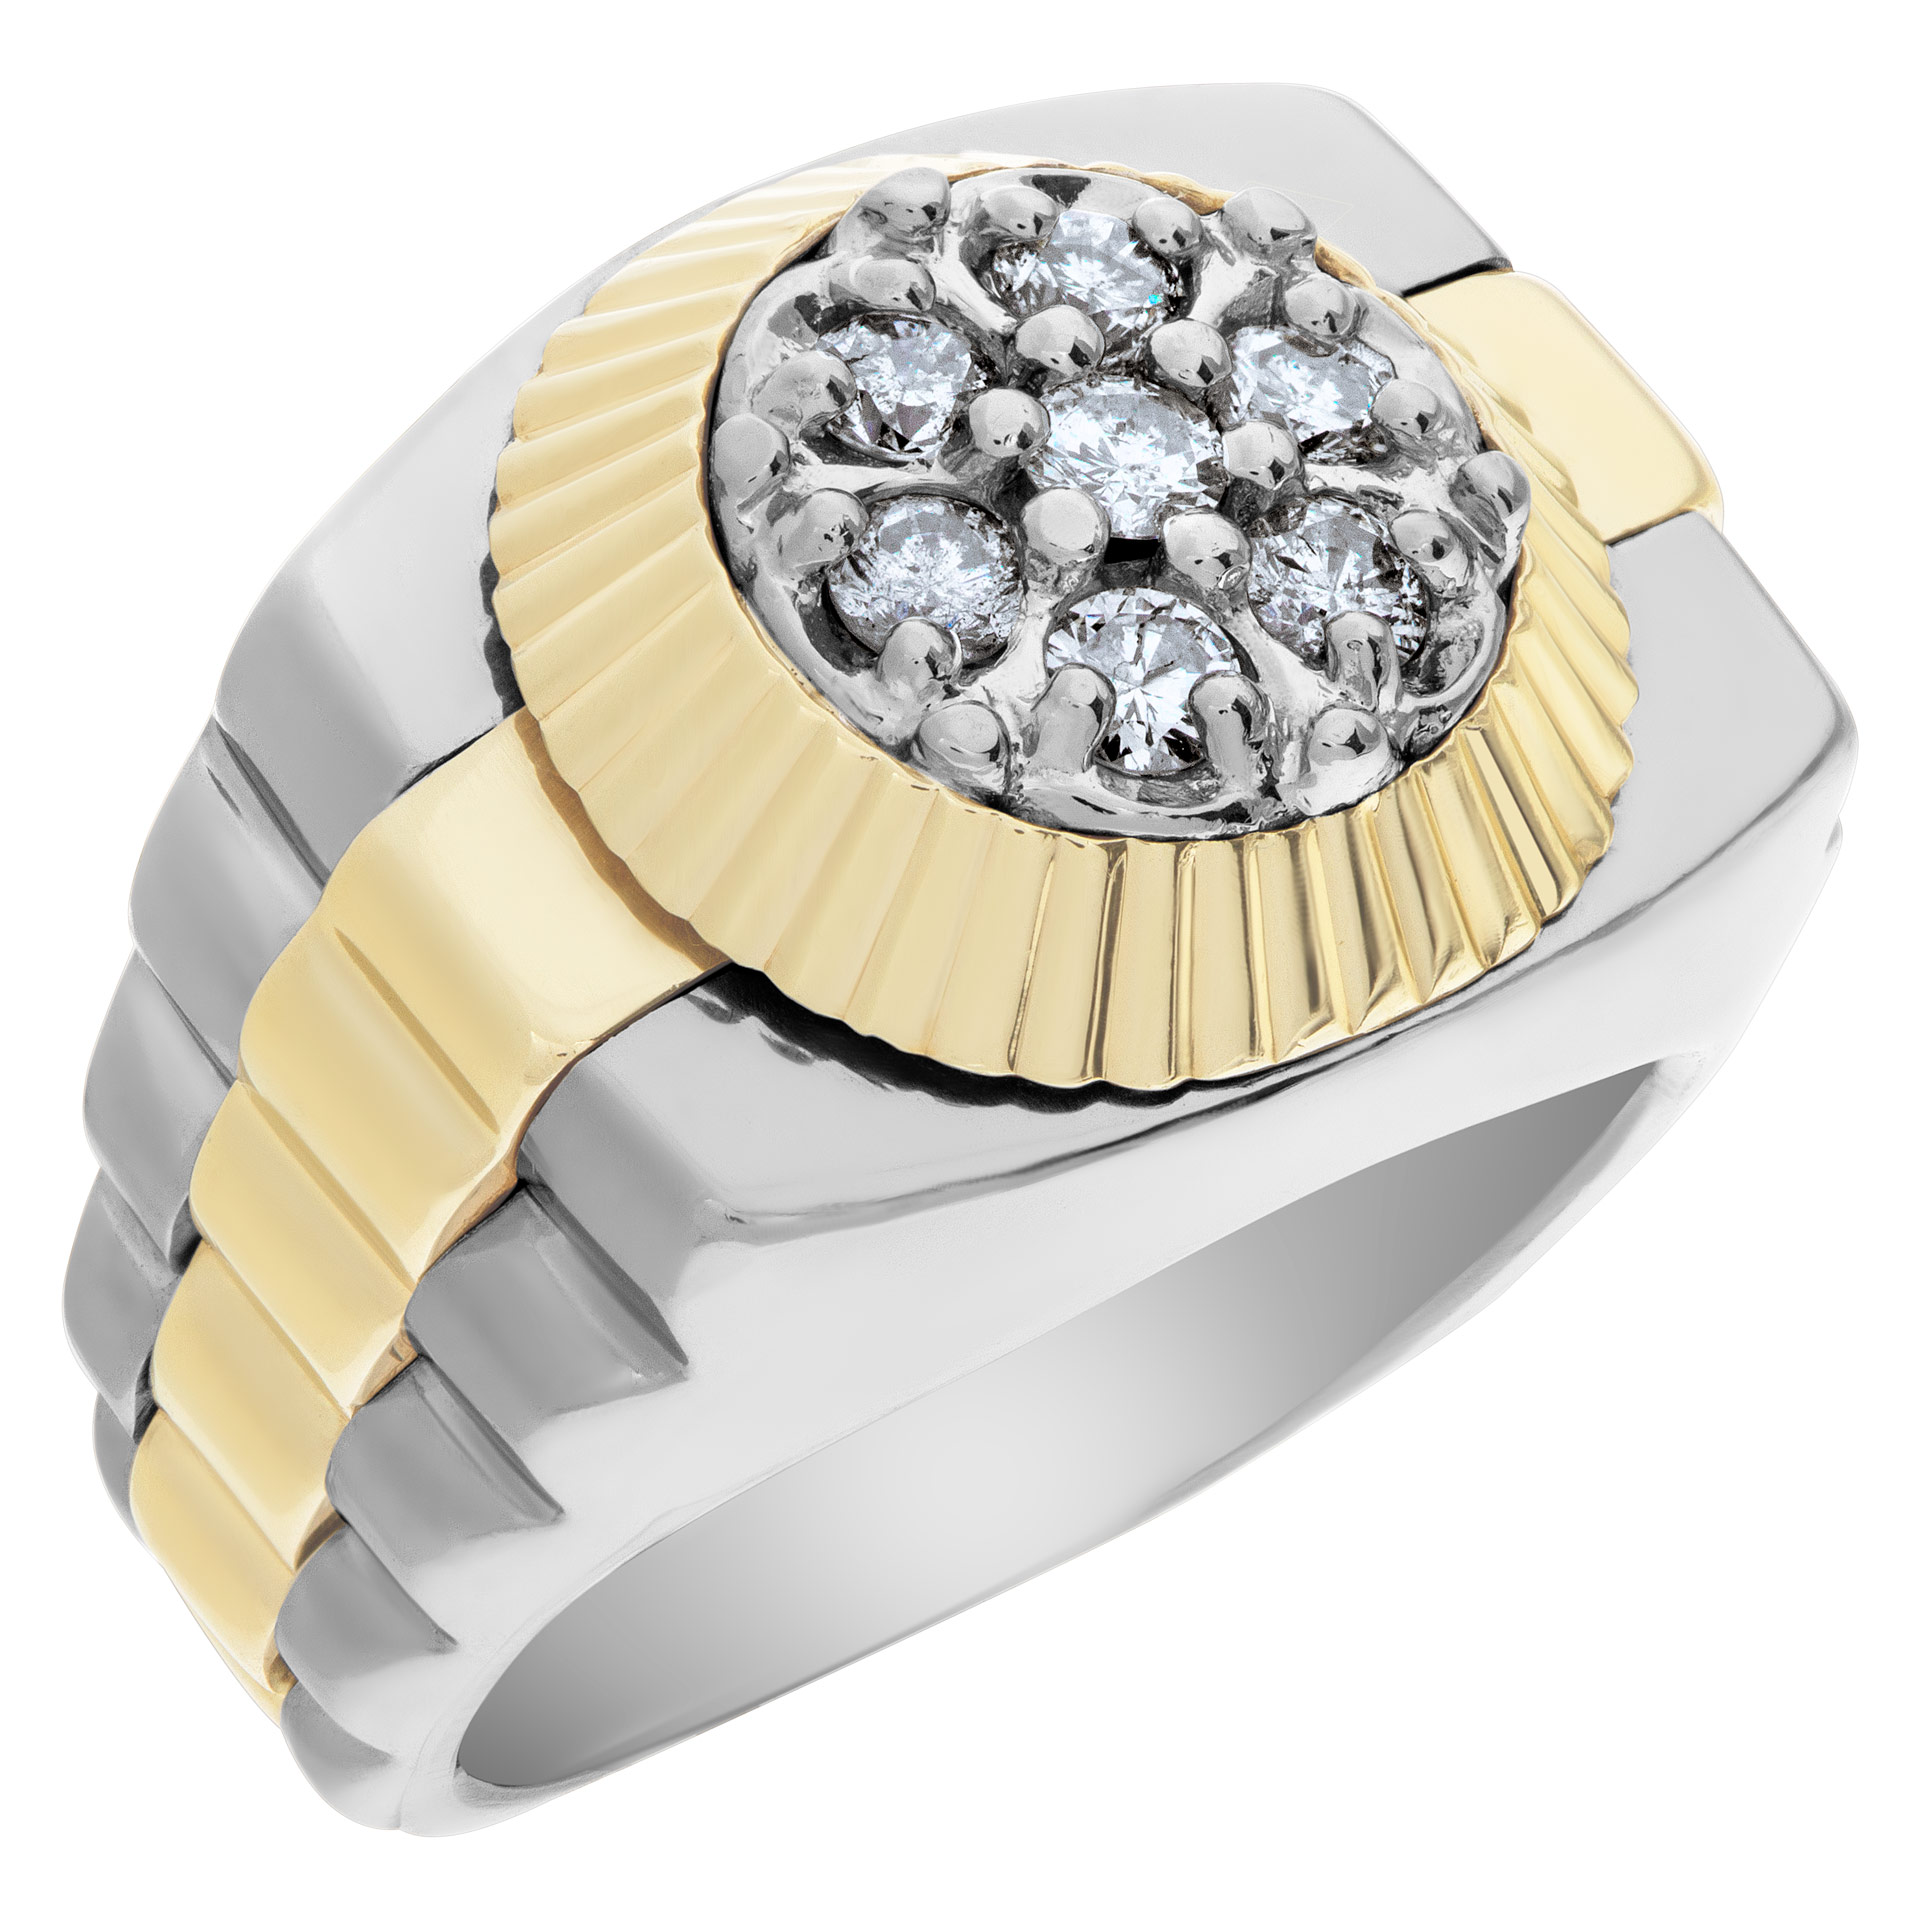 President style diamond ring in 14k white and yellow gold. image 3